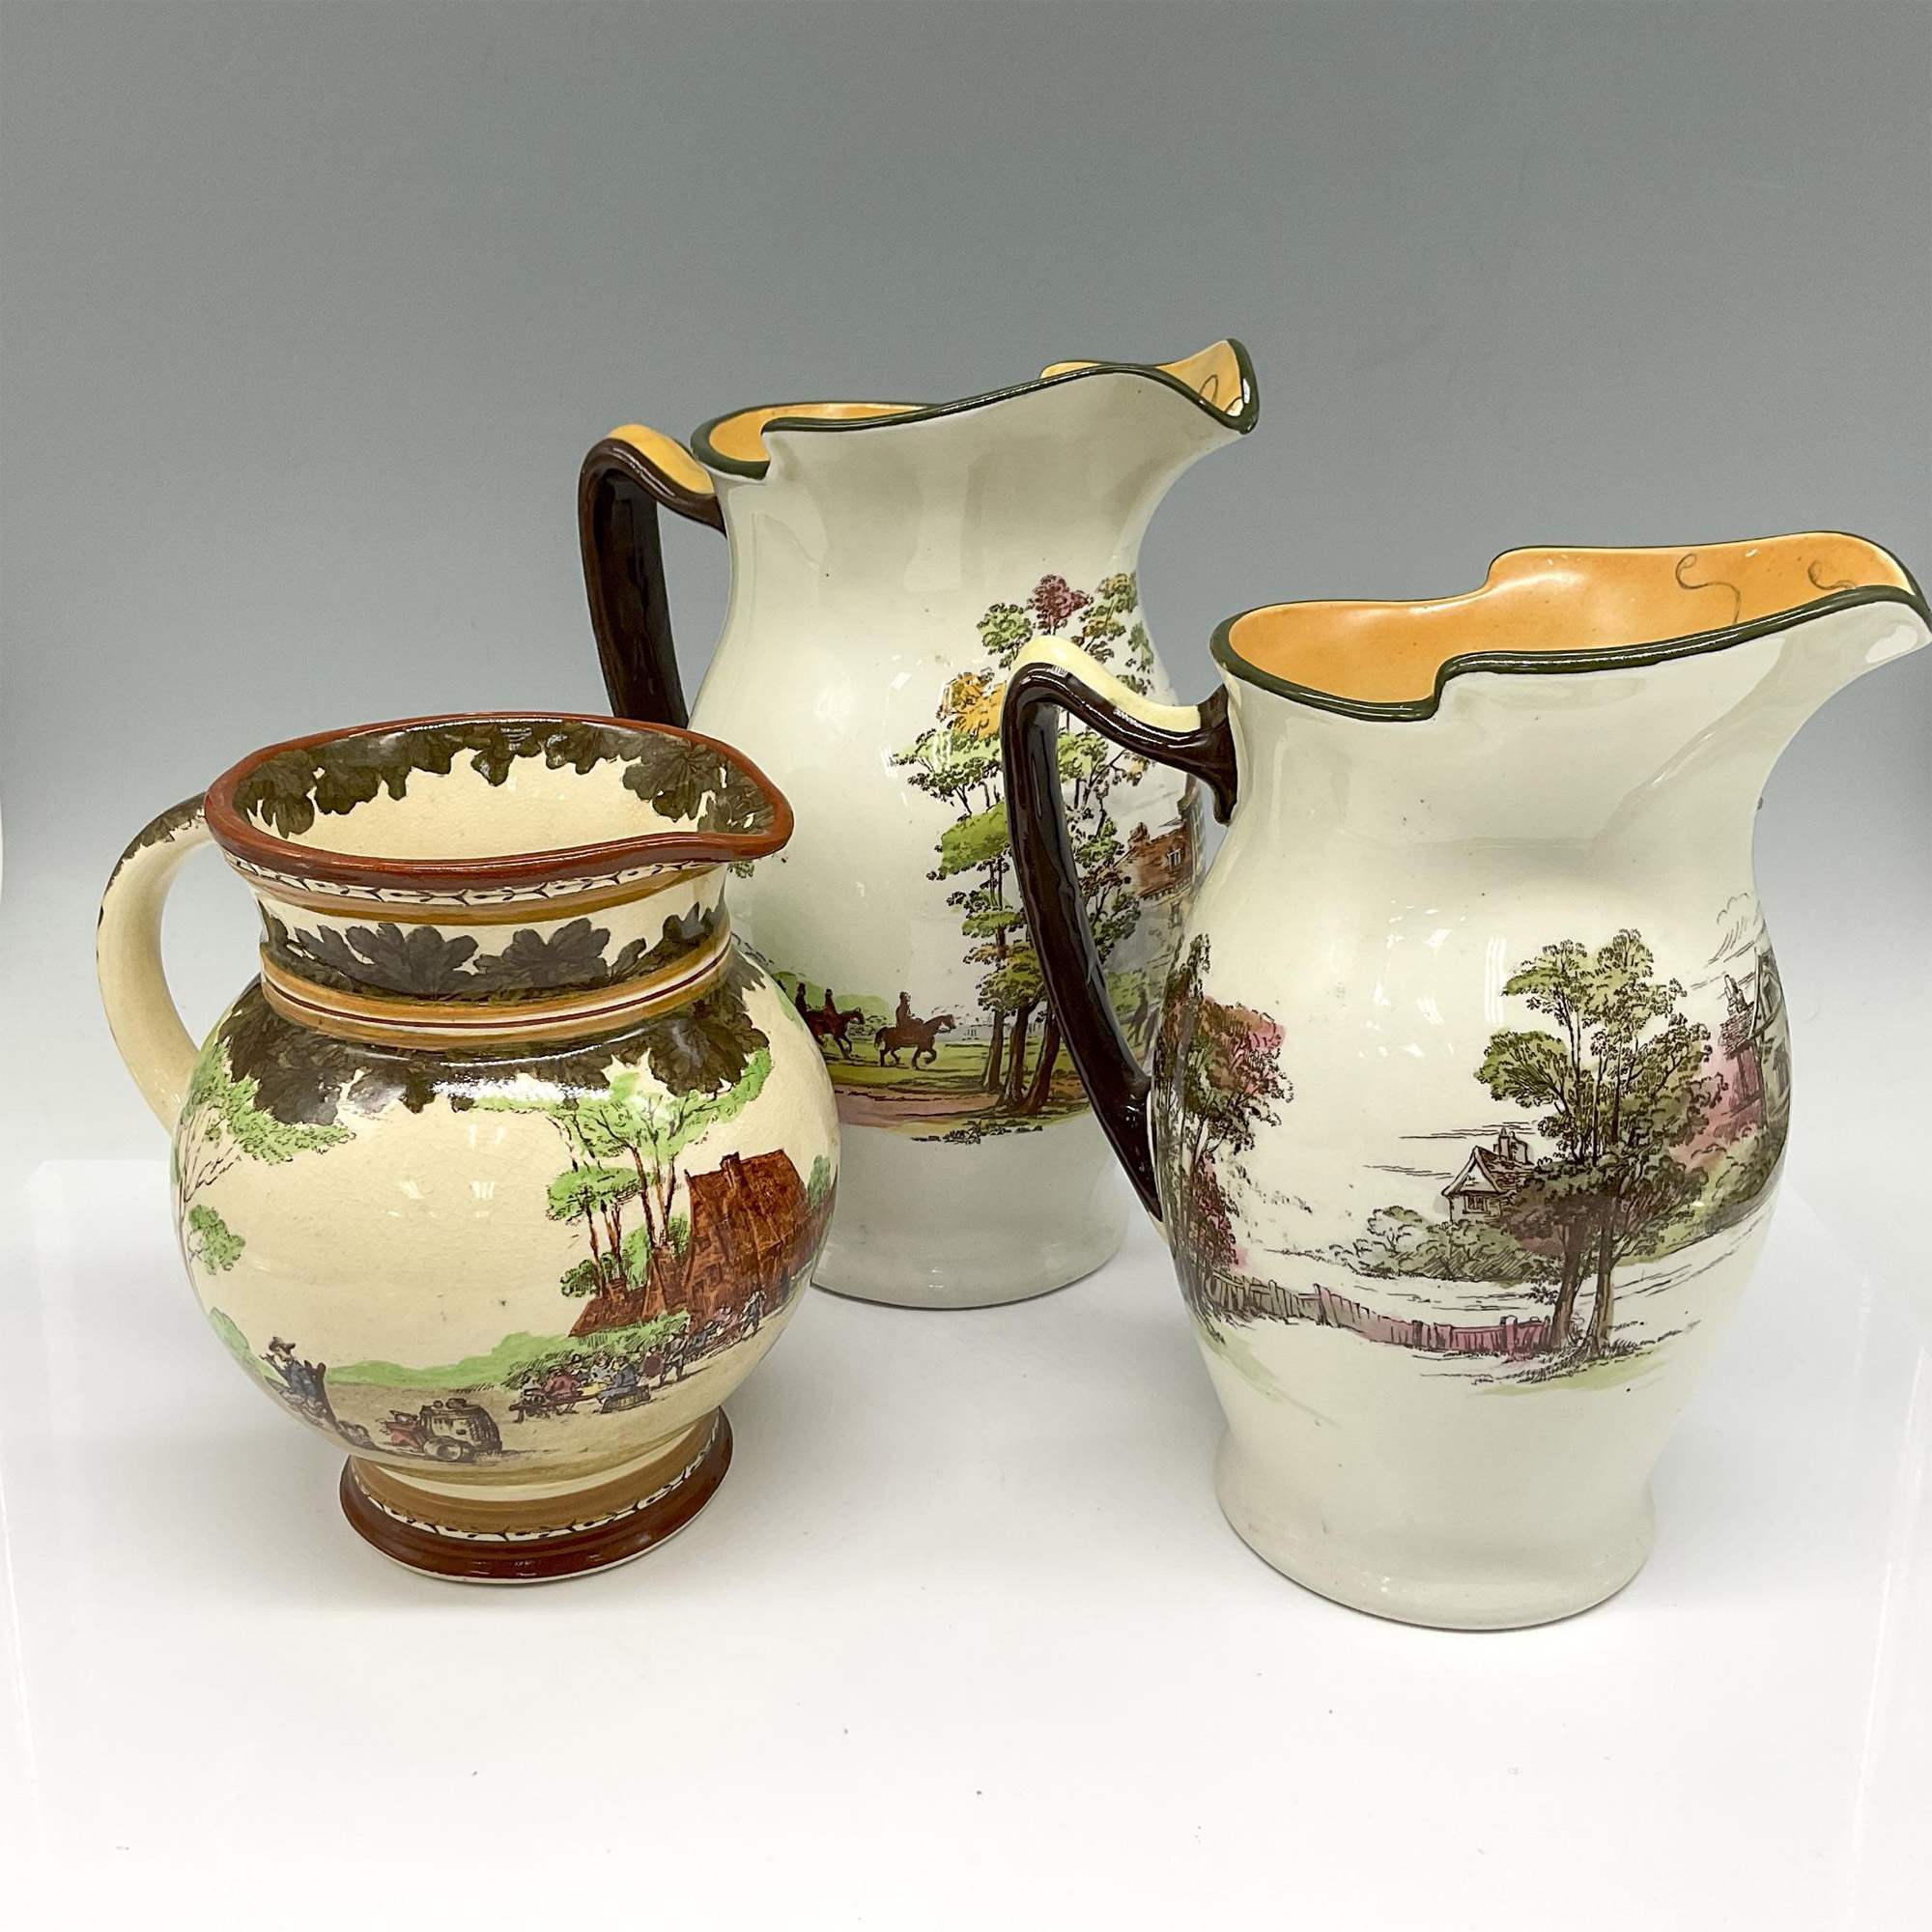 3pc Royal Doulton Porcelain Authors and Inns Series Pitchers - Image 3 of 4